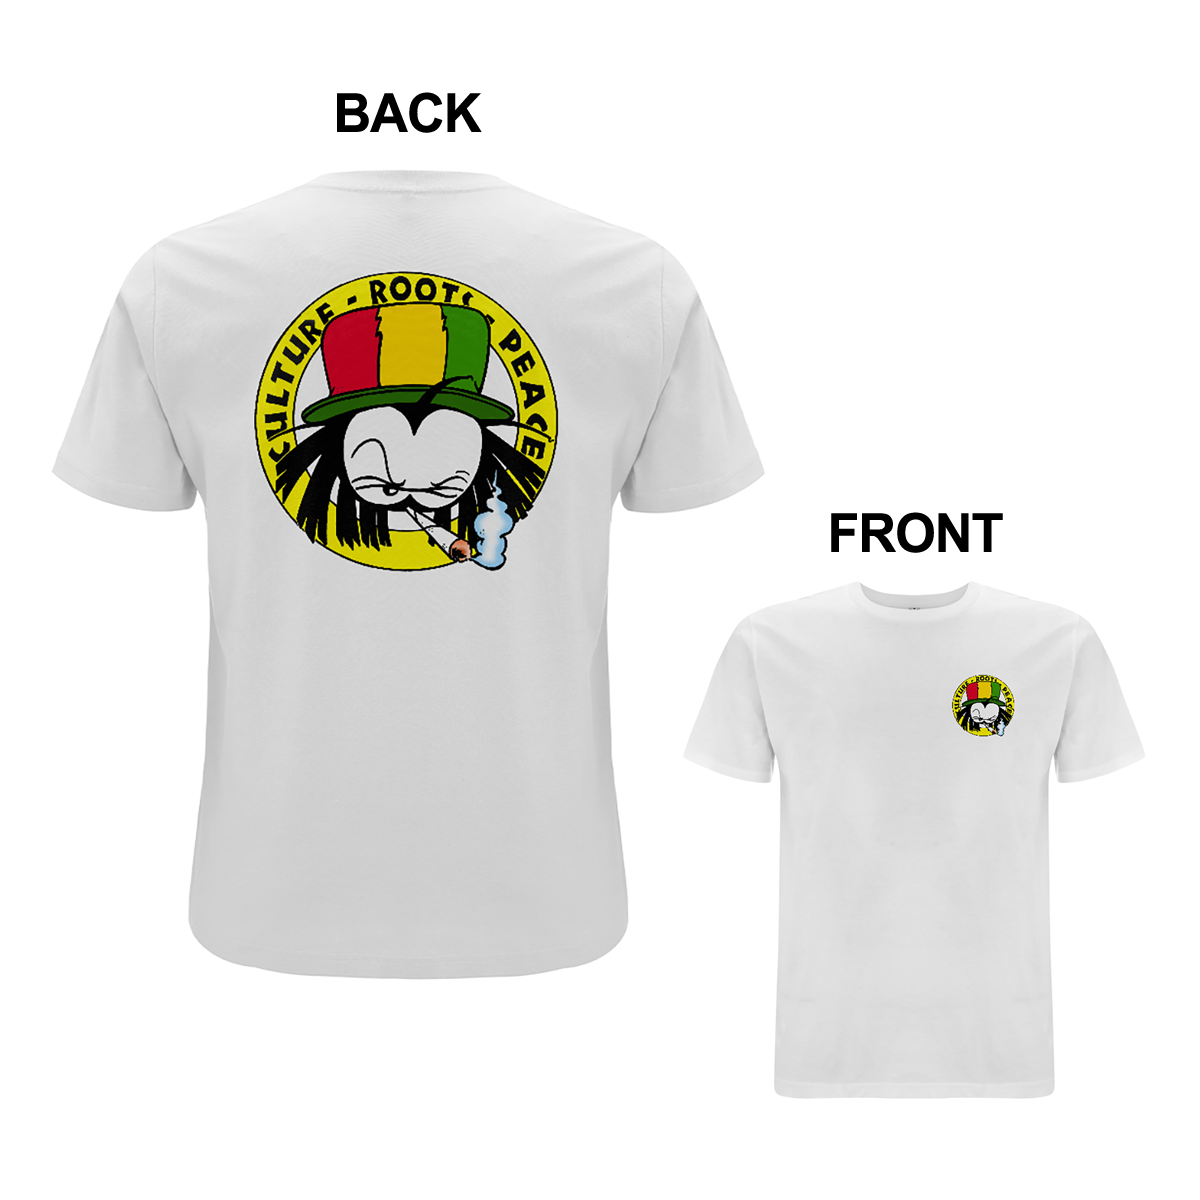 Dready 90s Crest Front and Back Print T-Shirt - Dready Original